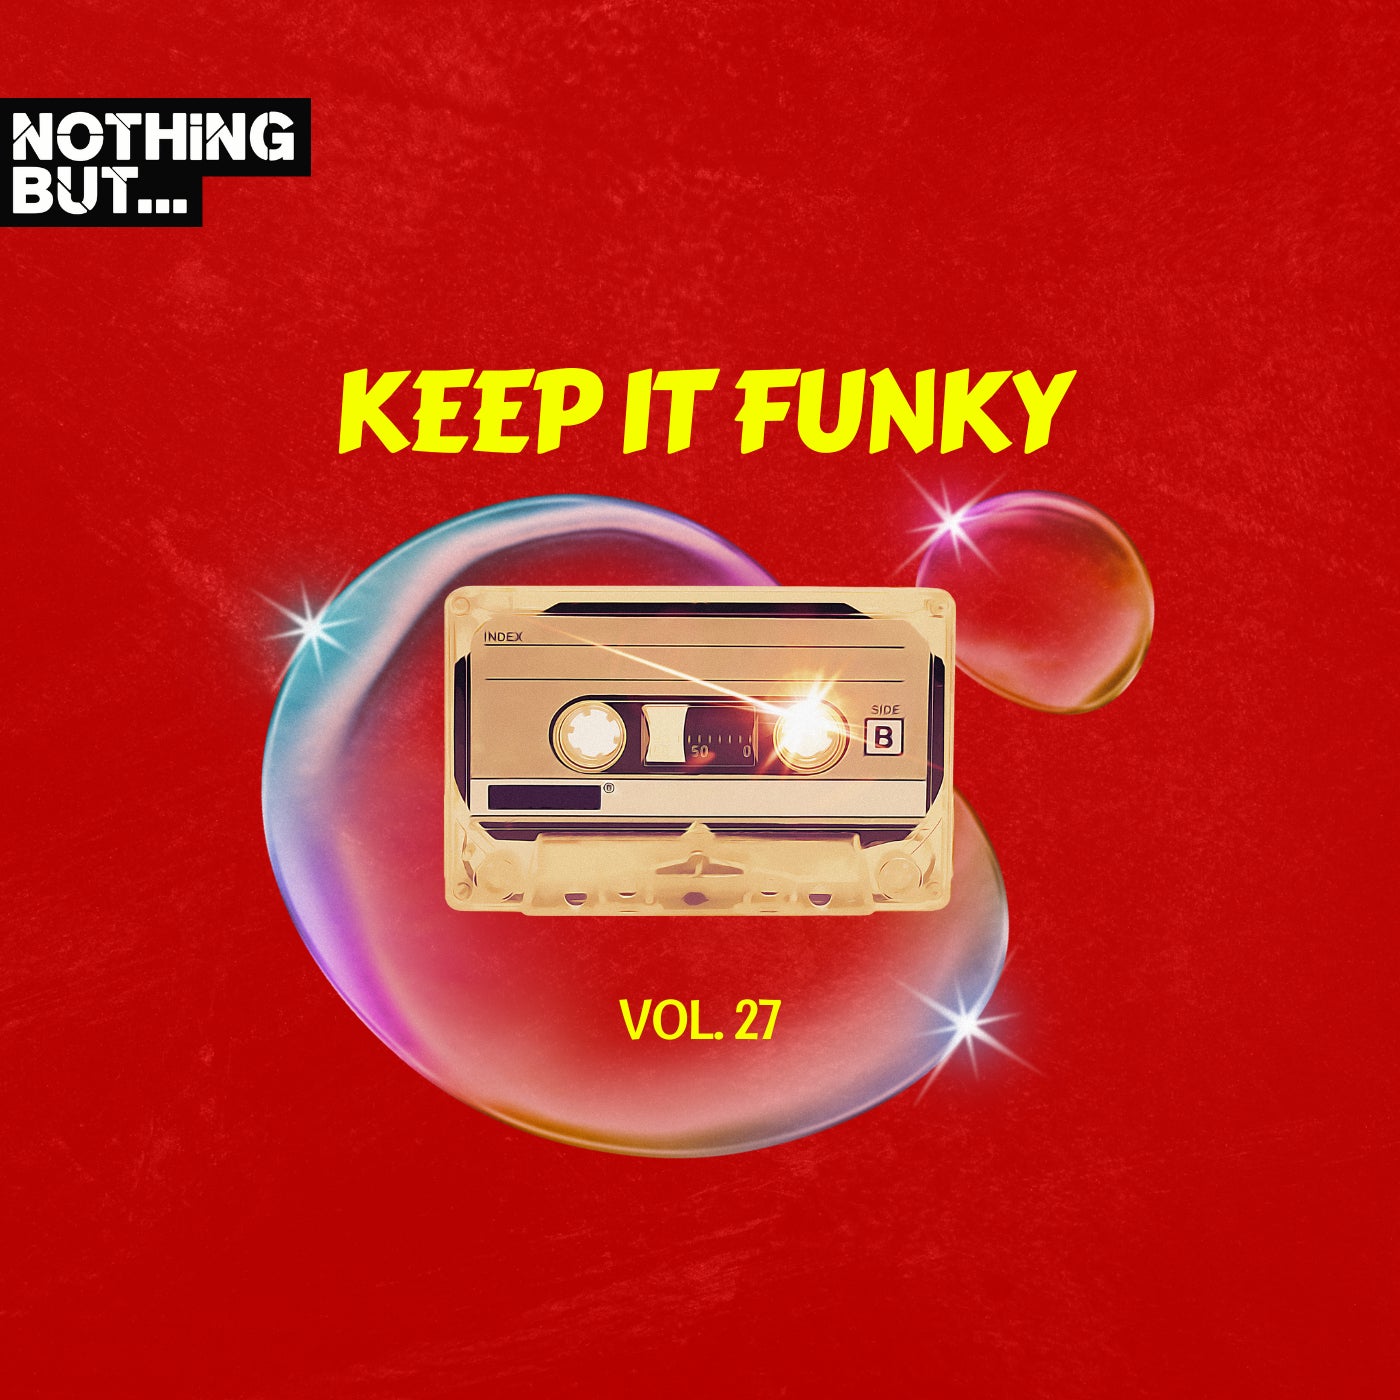 Nothing But... Keep It Funky, Vol. 27